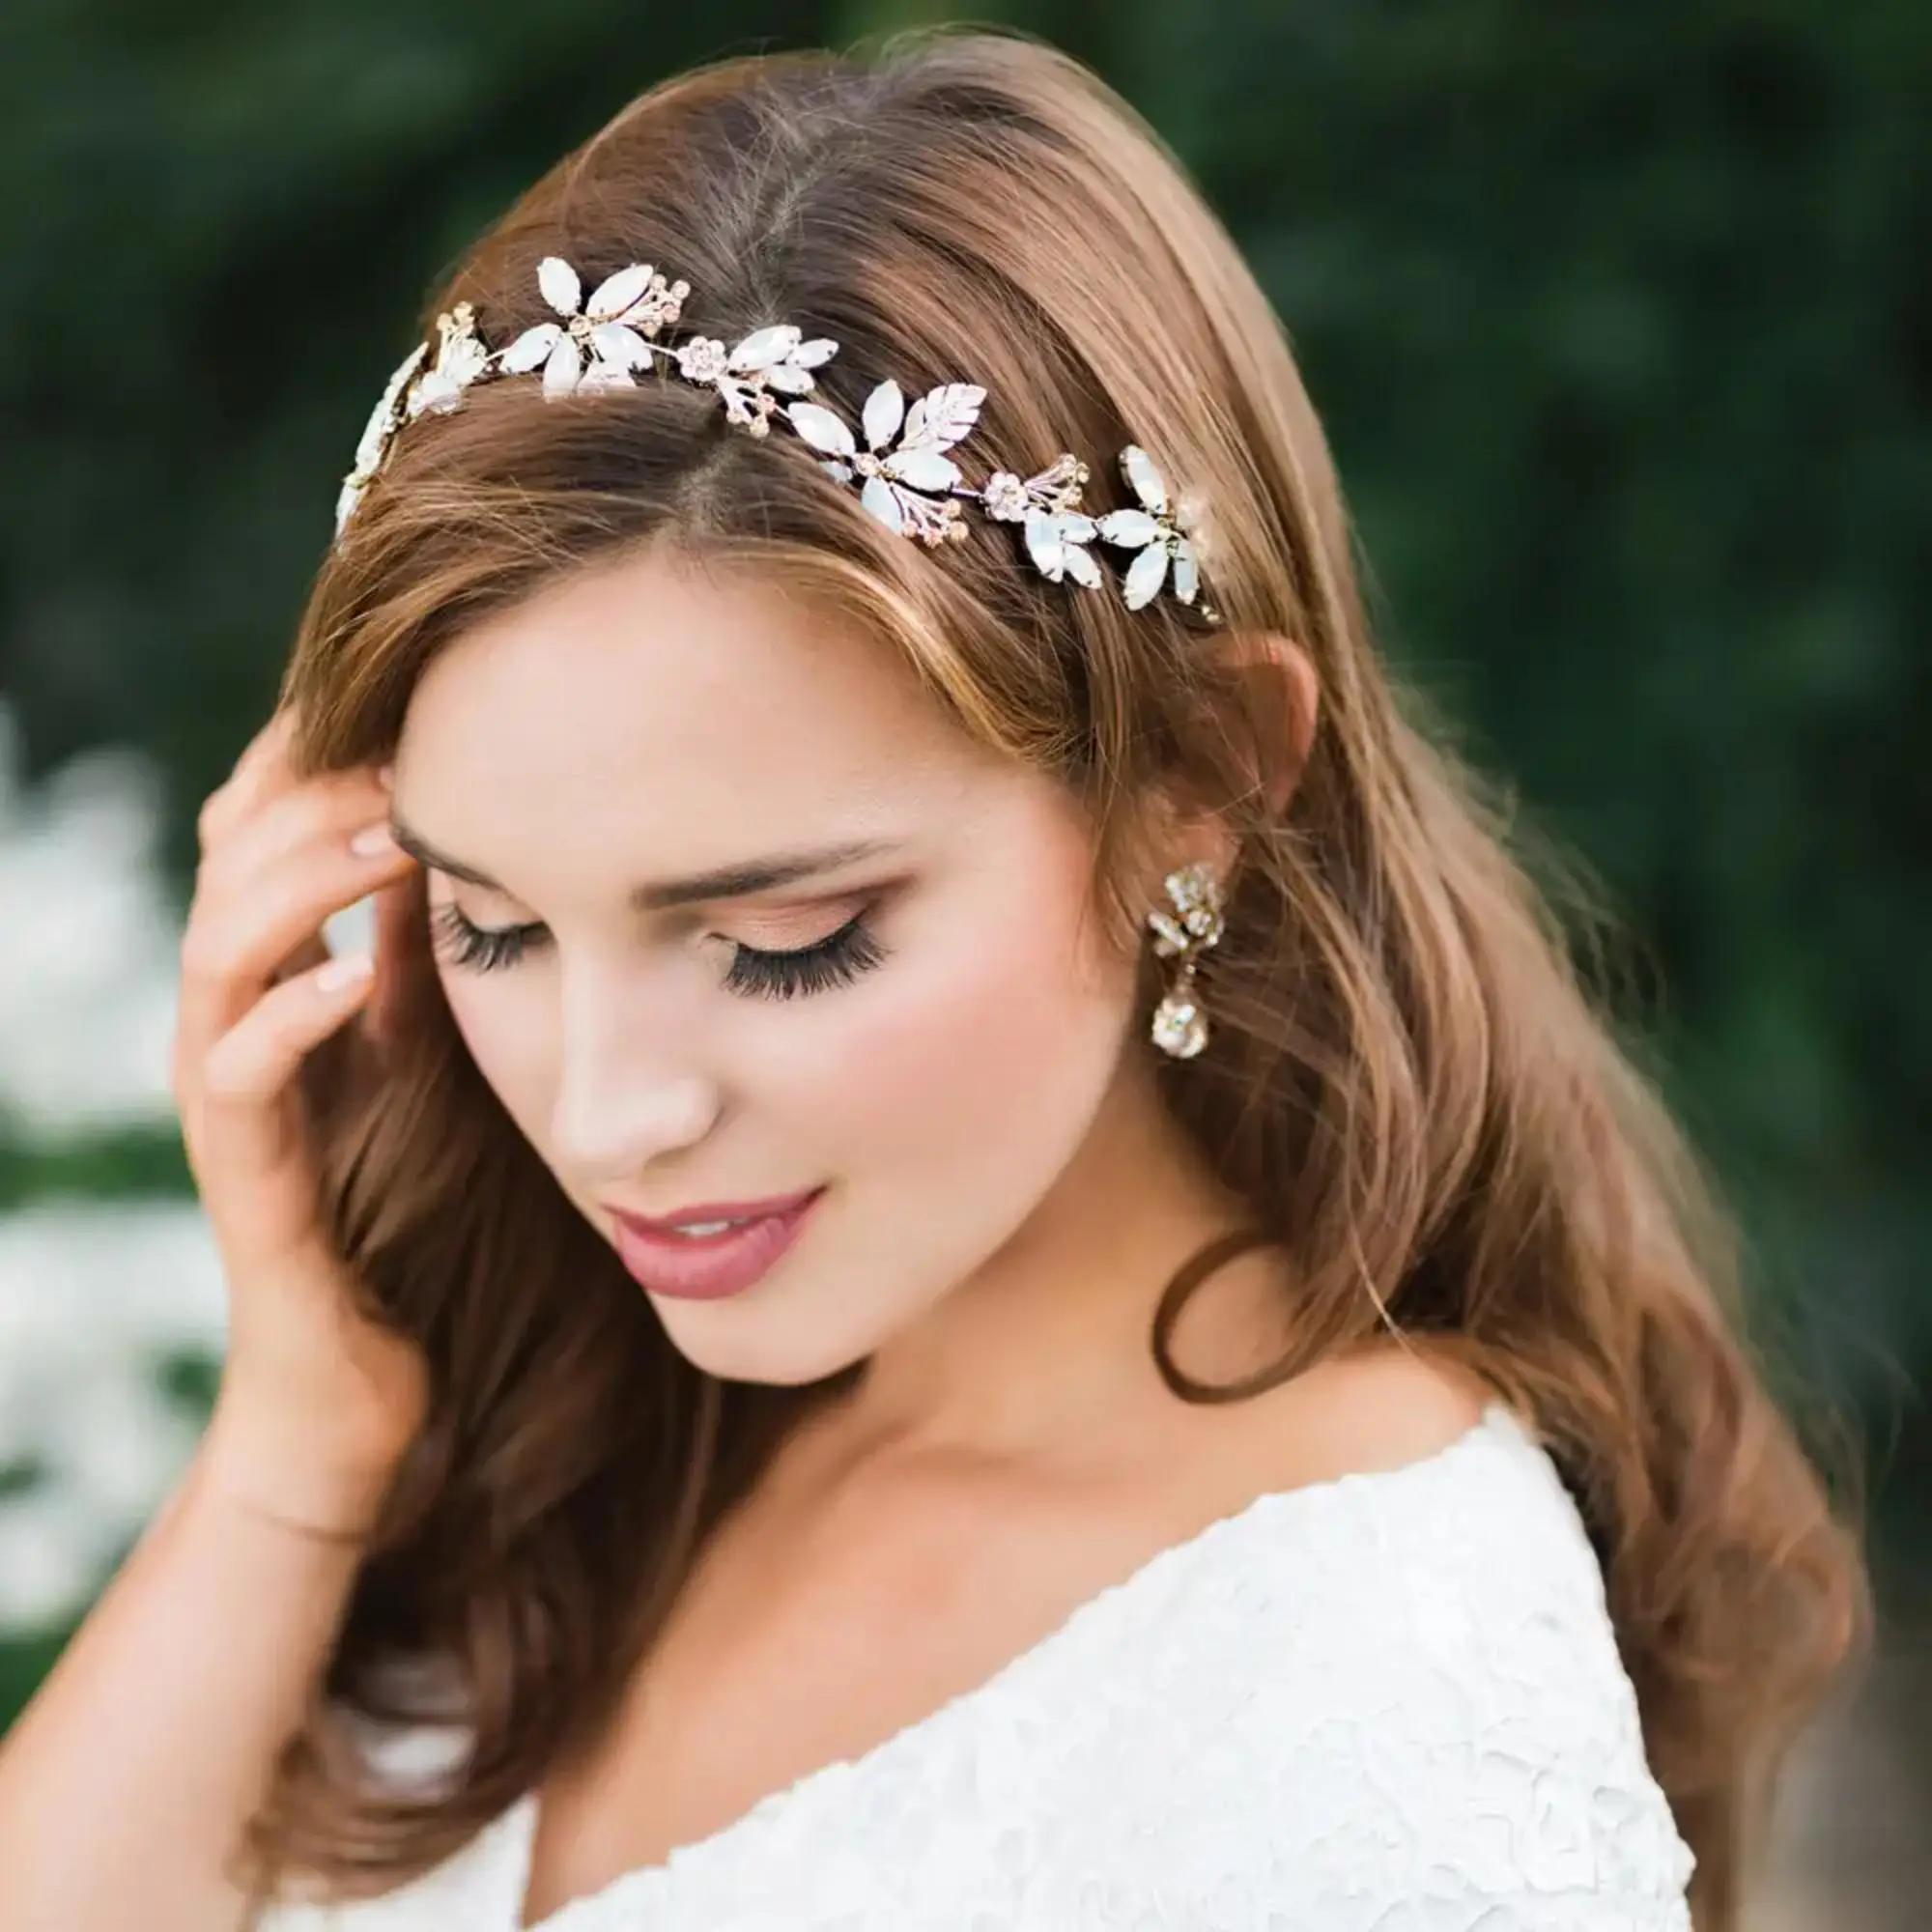 Match Made in Heaven: Choosing the Perfect Accessories For Your Wedding Dress Image